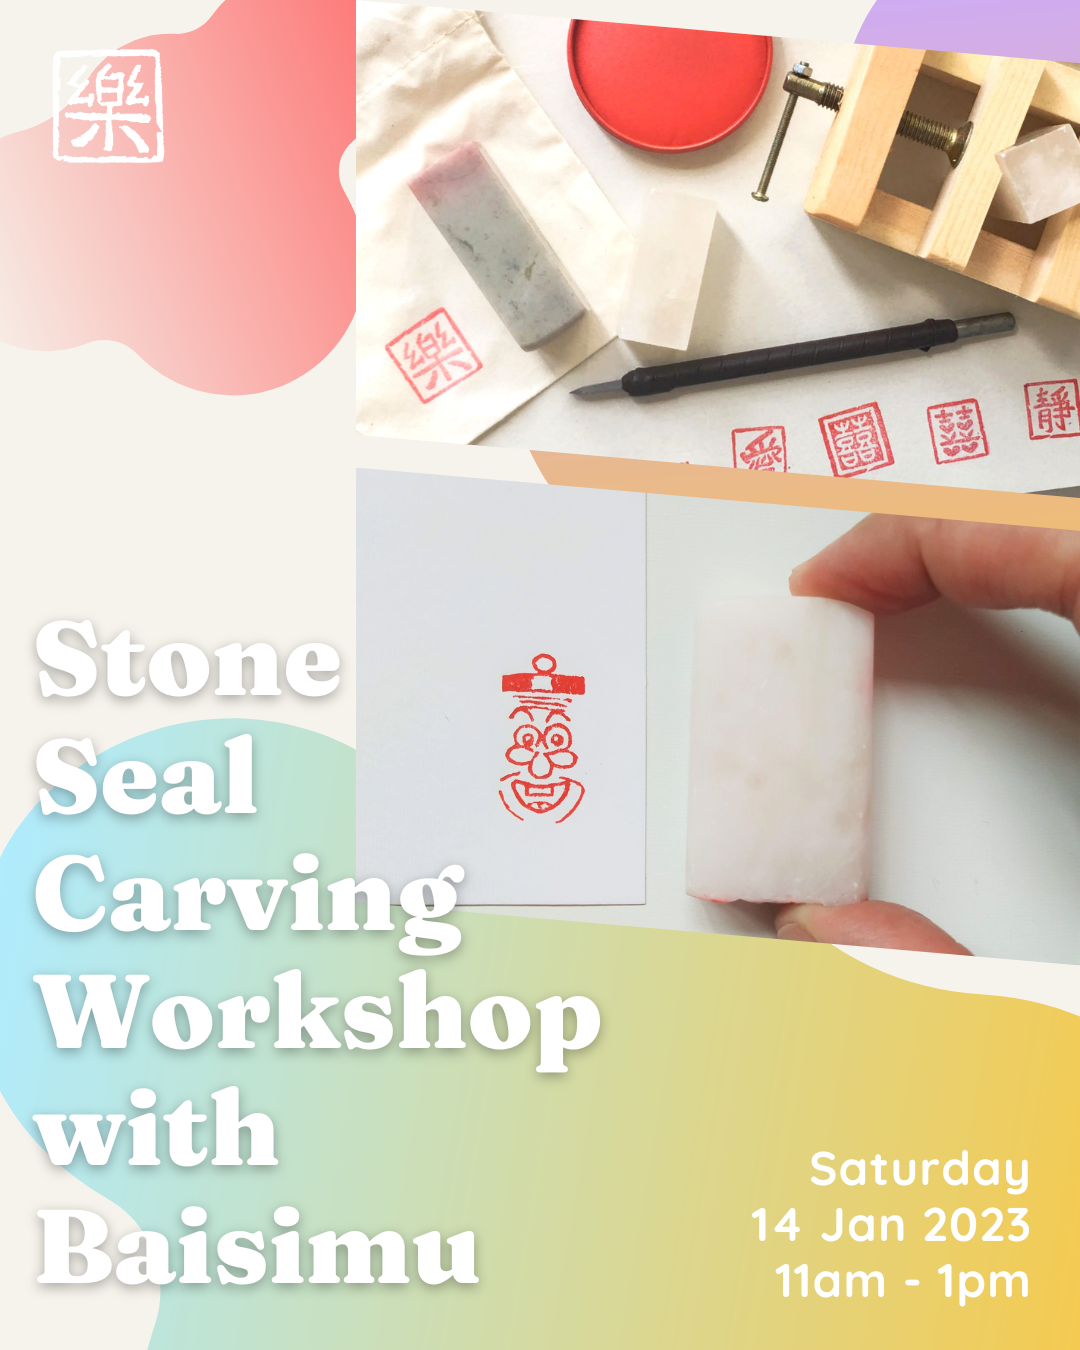 Stone Seal Carving Workshop with Baisimu, 14 Jan, 11am-1pm